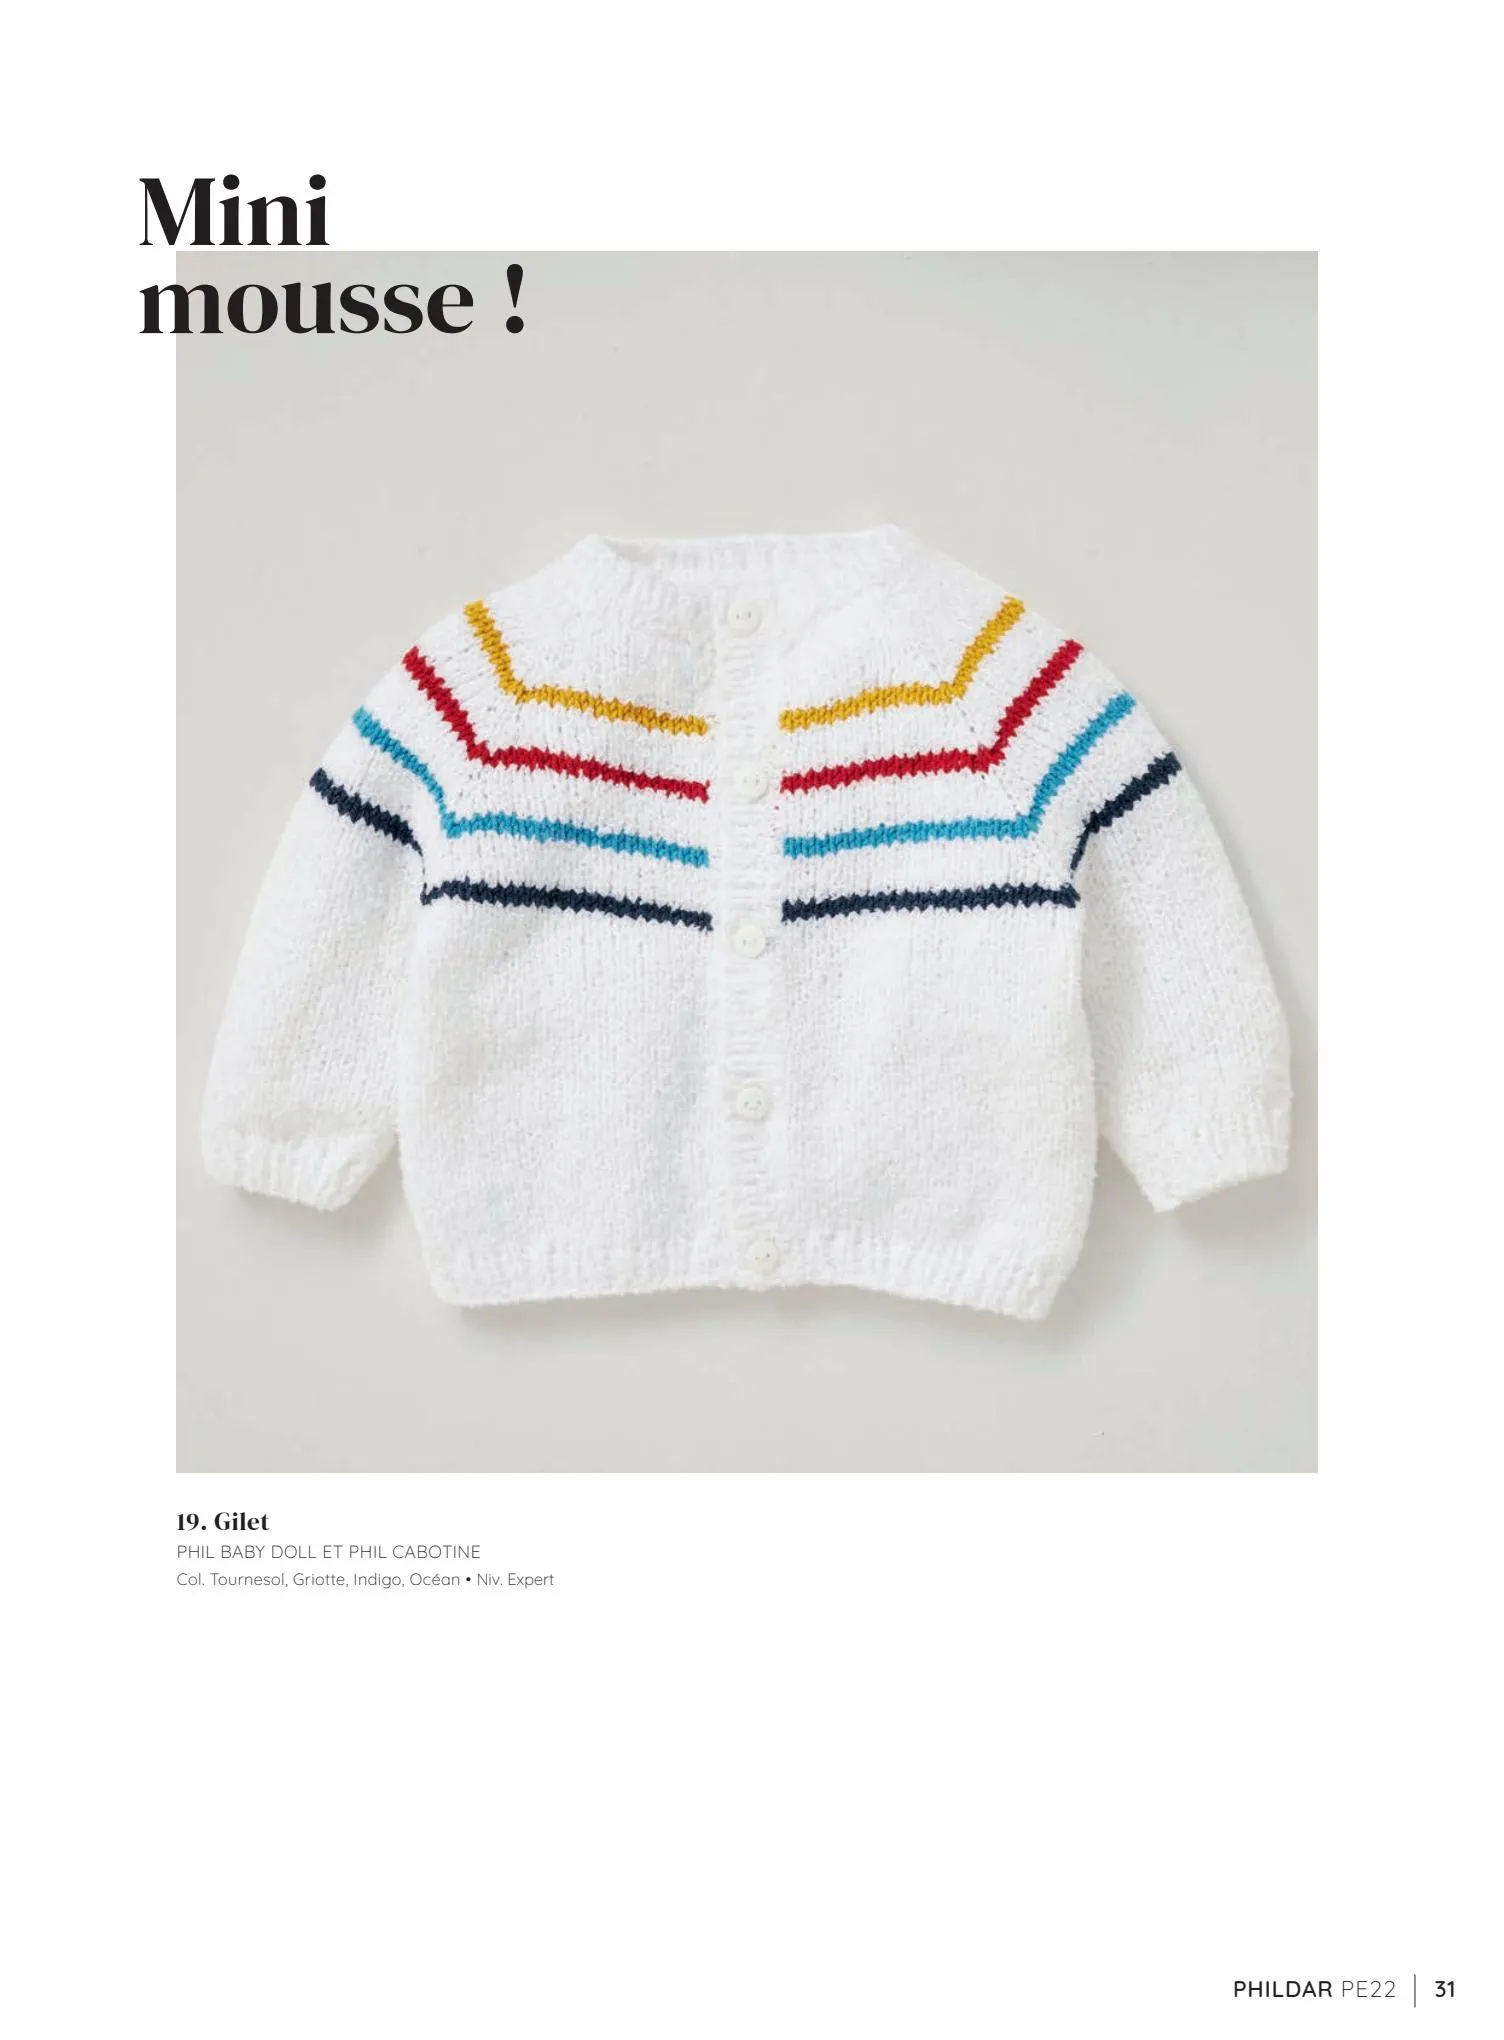 Catalogue Catalogue n°212 Layette, page 00029